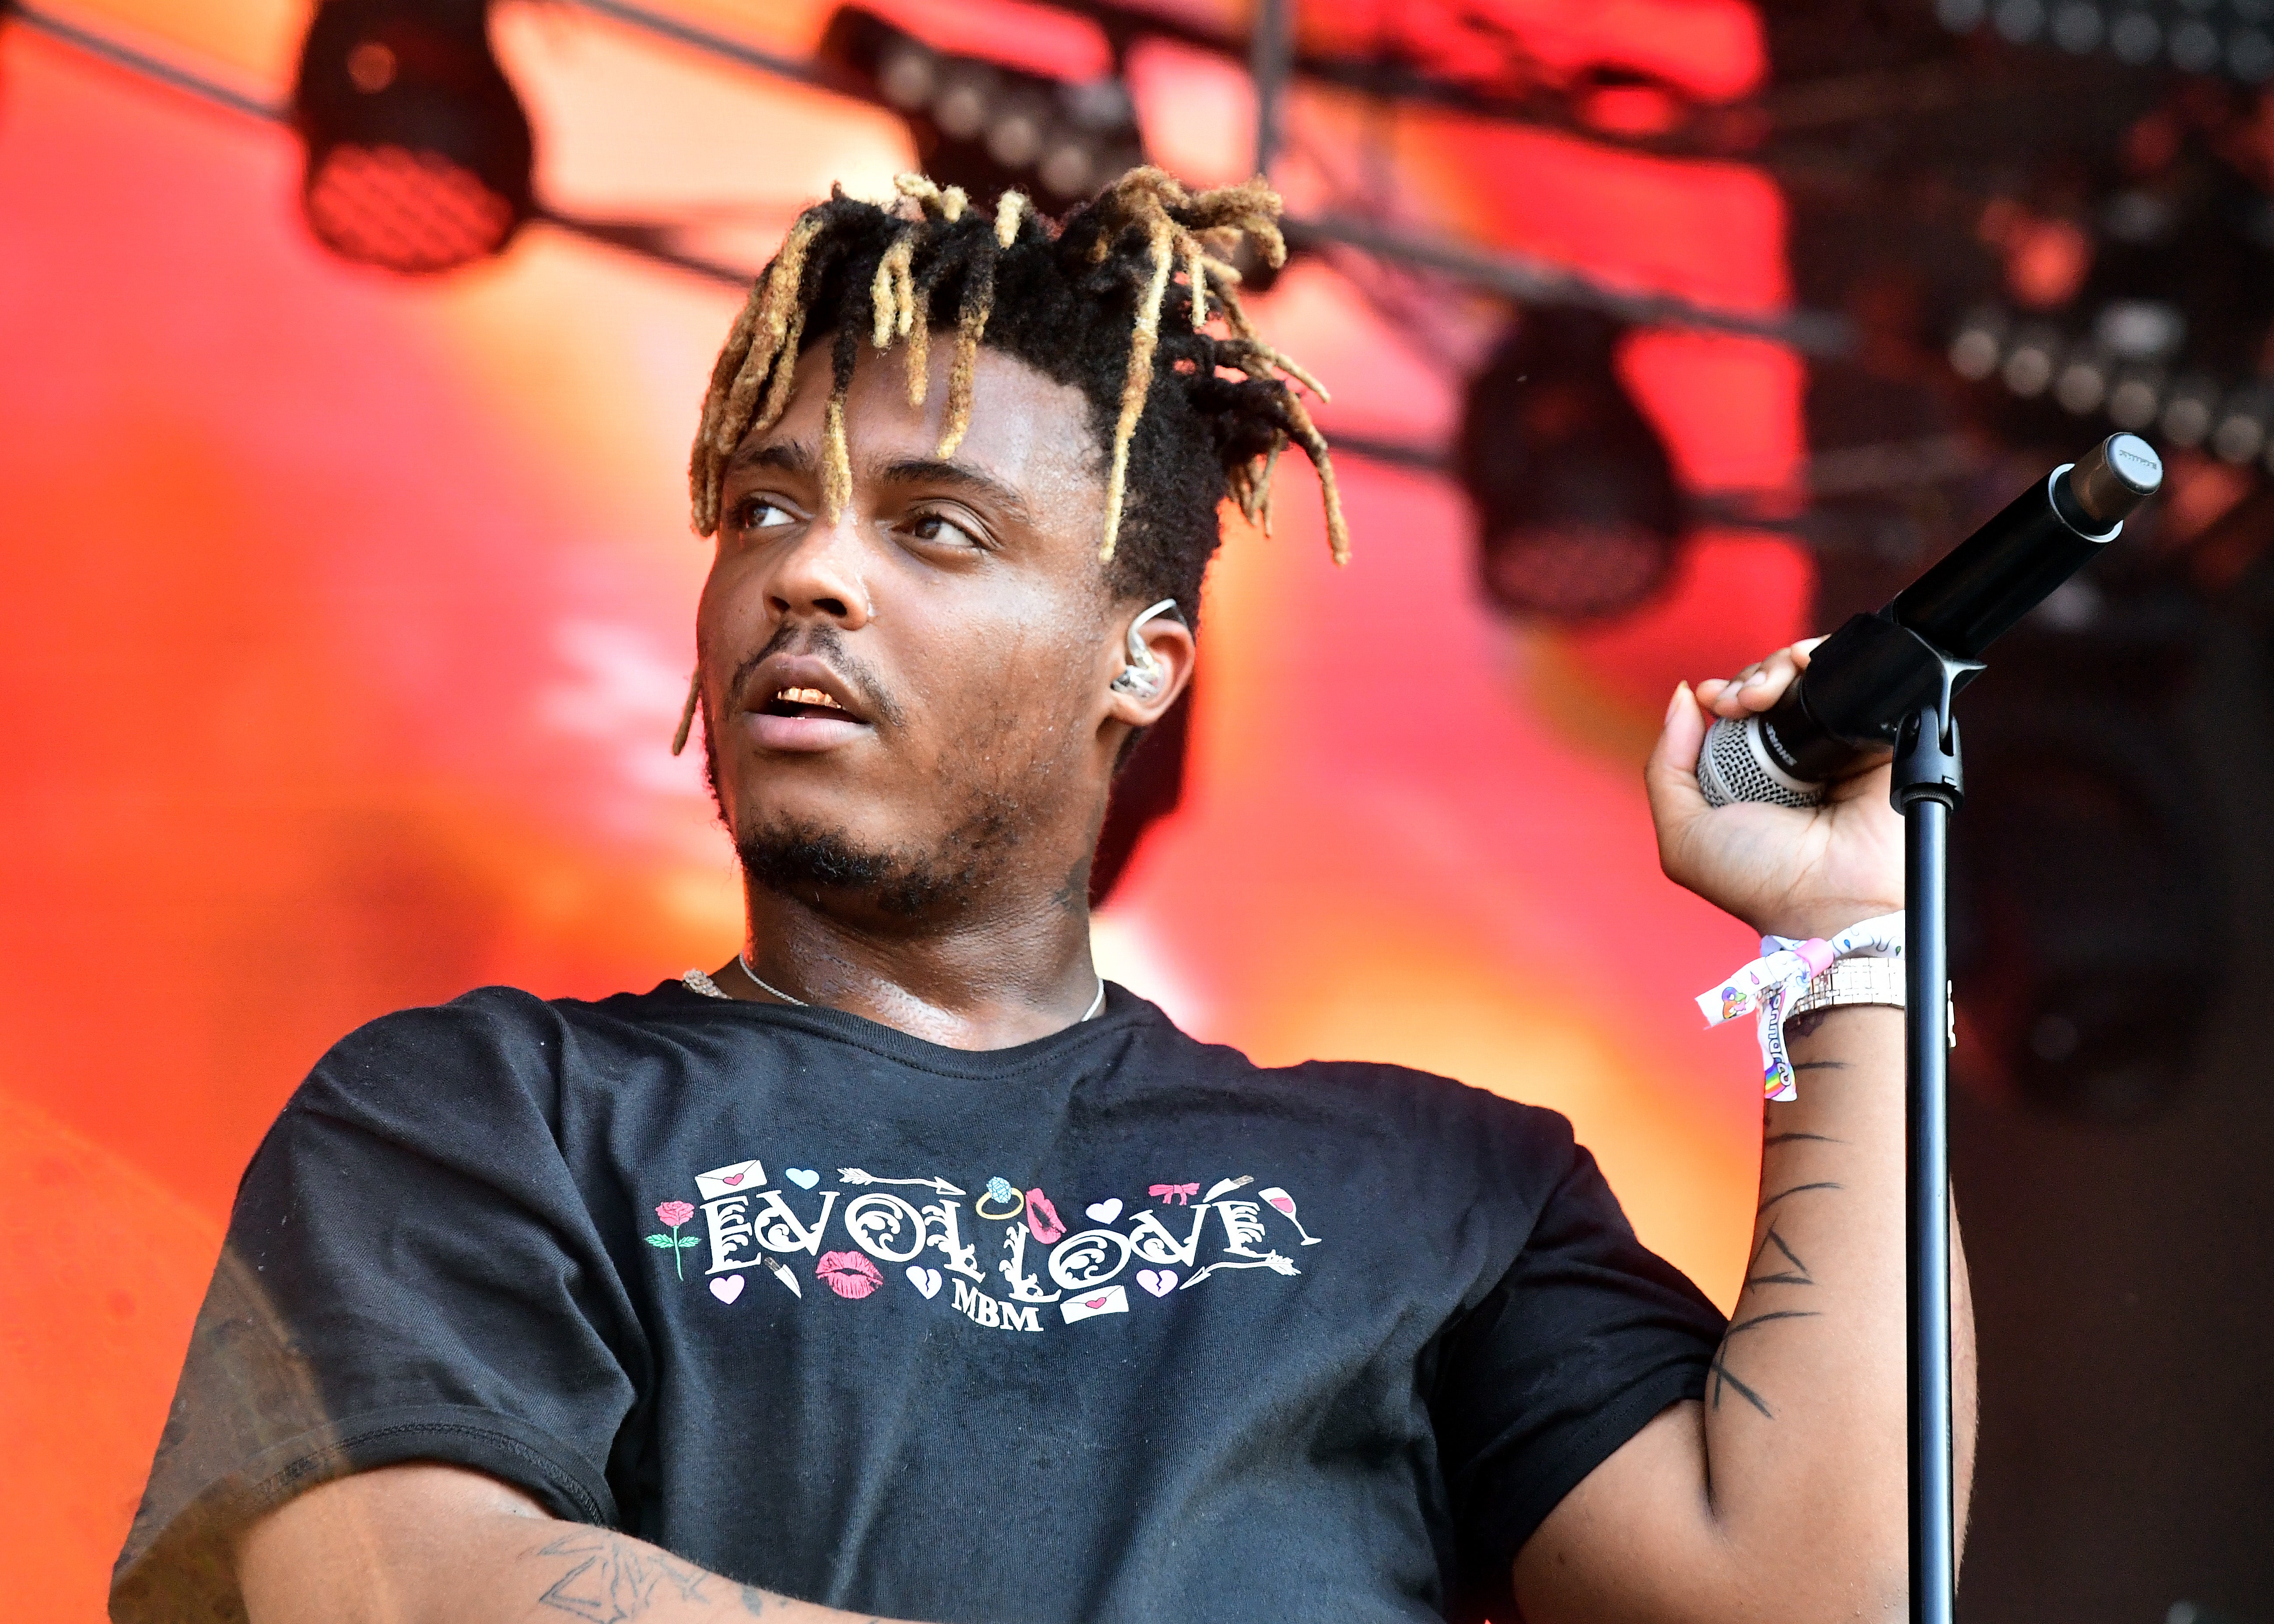 Drake, Chance The Rapper And Other Celebrities Pay Tribute To Juice WRLD After His Sudden Death